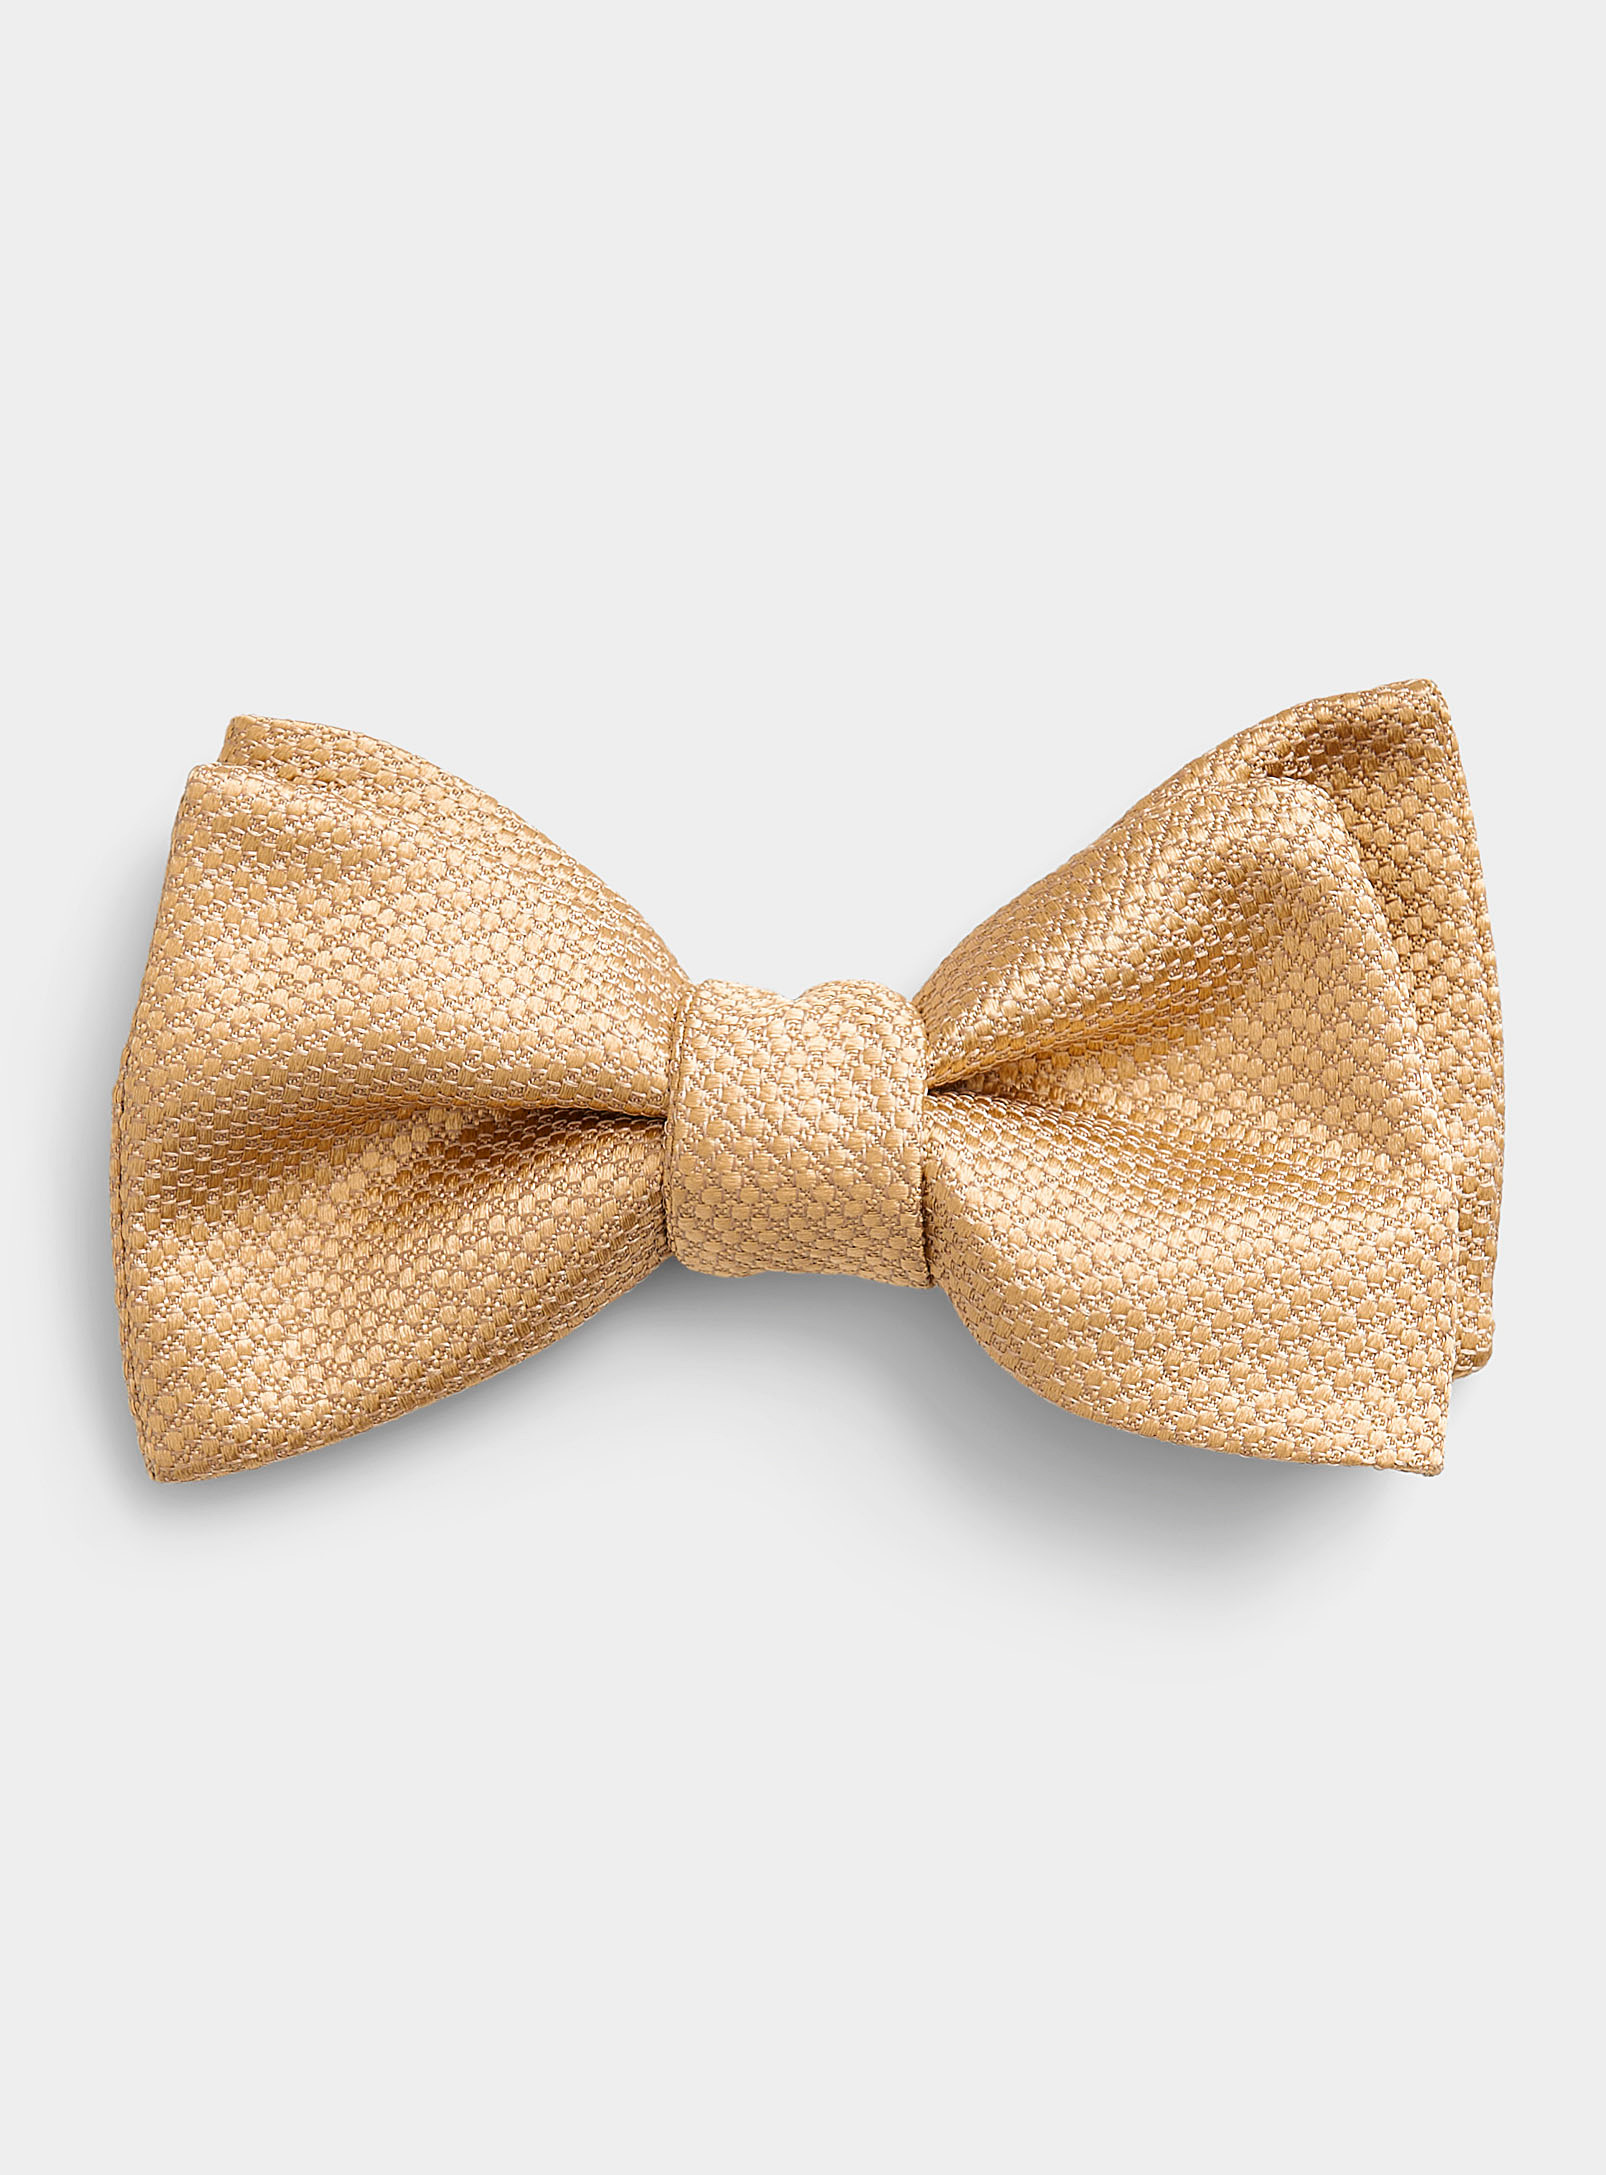 Blick - Men's Textured jacquard champagne bow tie